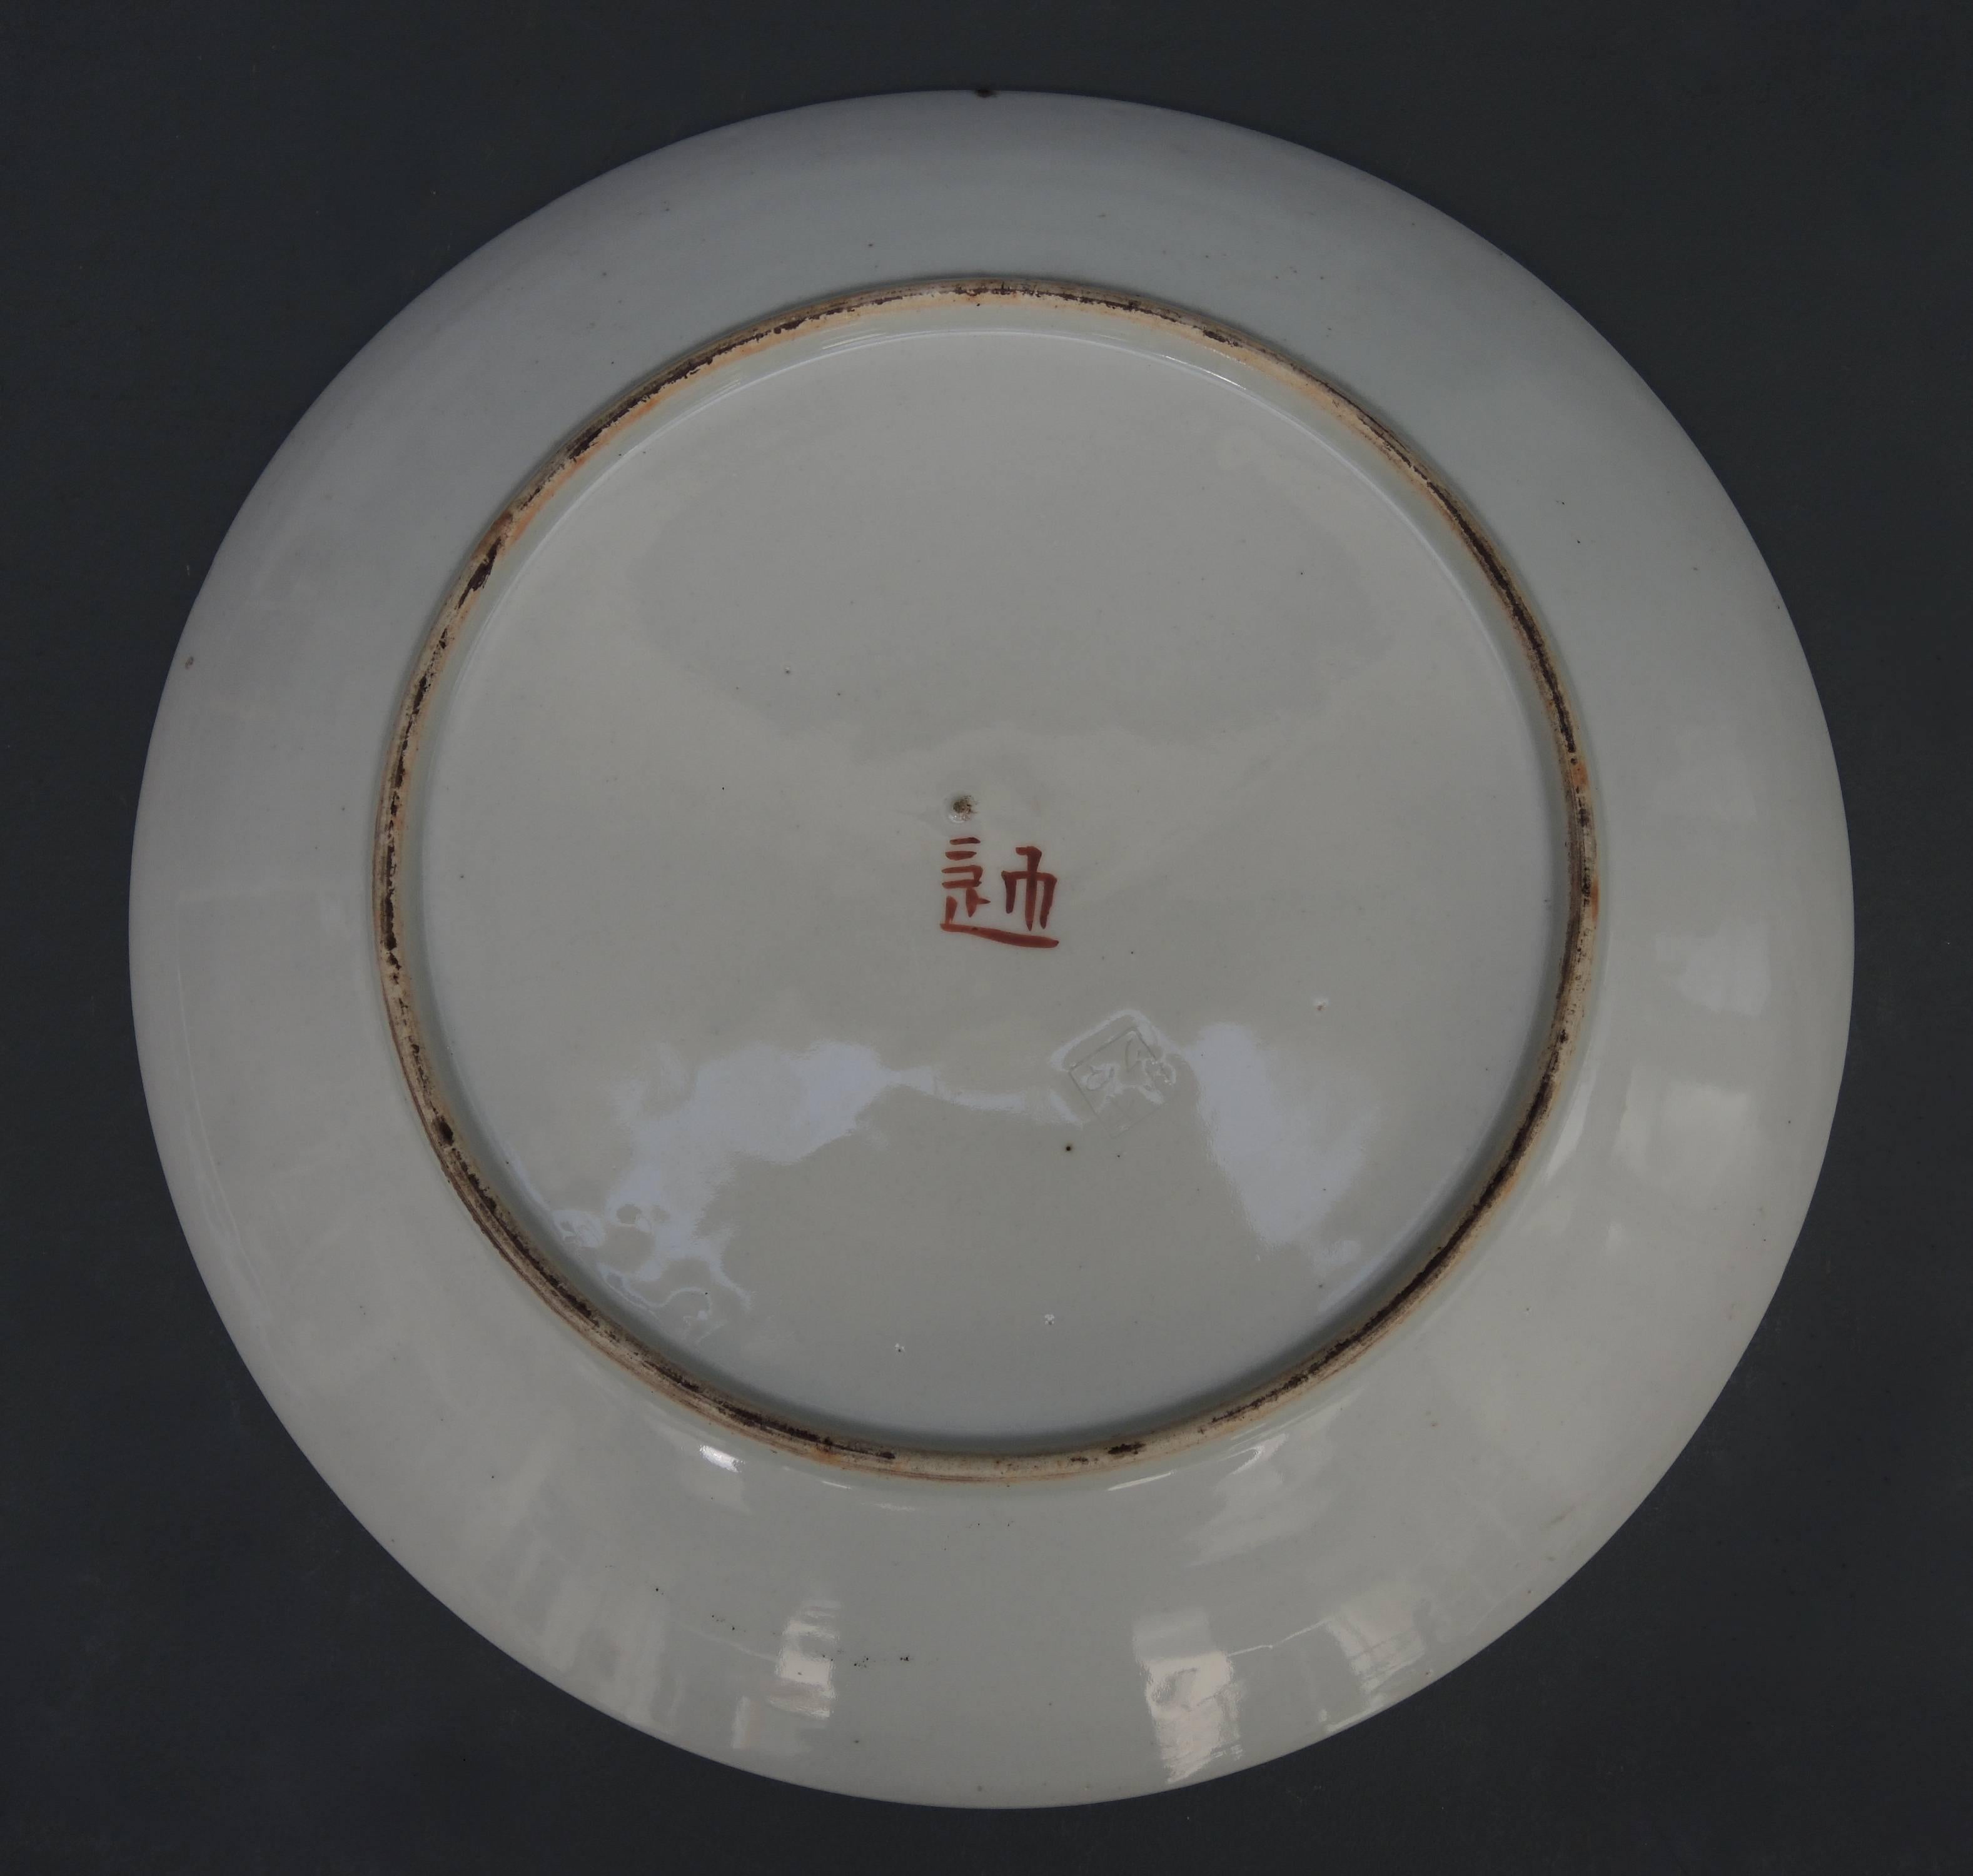 Large Japanese inspired French serving plate showing a taoist monk.
During the 19th century, the demand in fashion for imported china from Asia was considerable and so some entrepreneurial French firms reproduced ceramics in a breadth of Asian